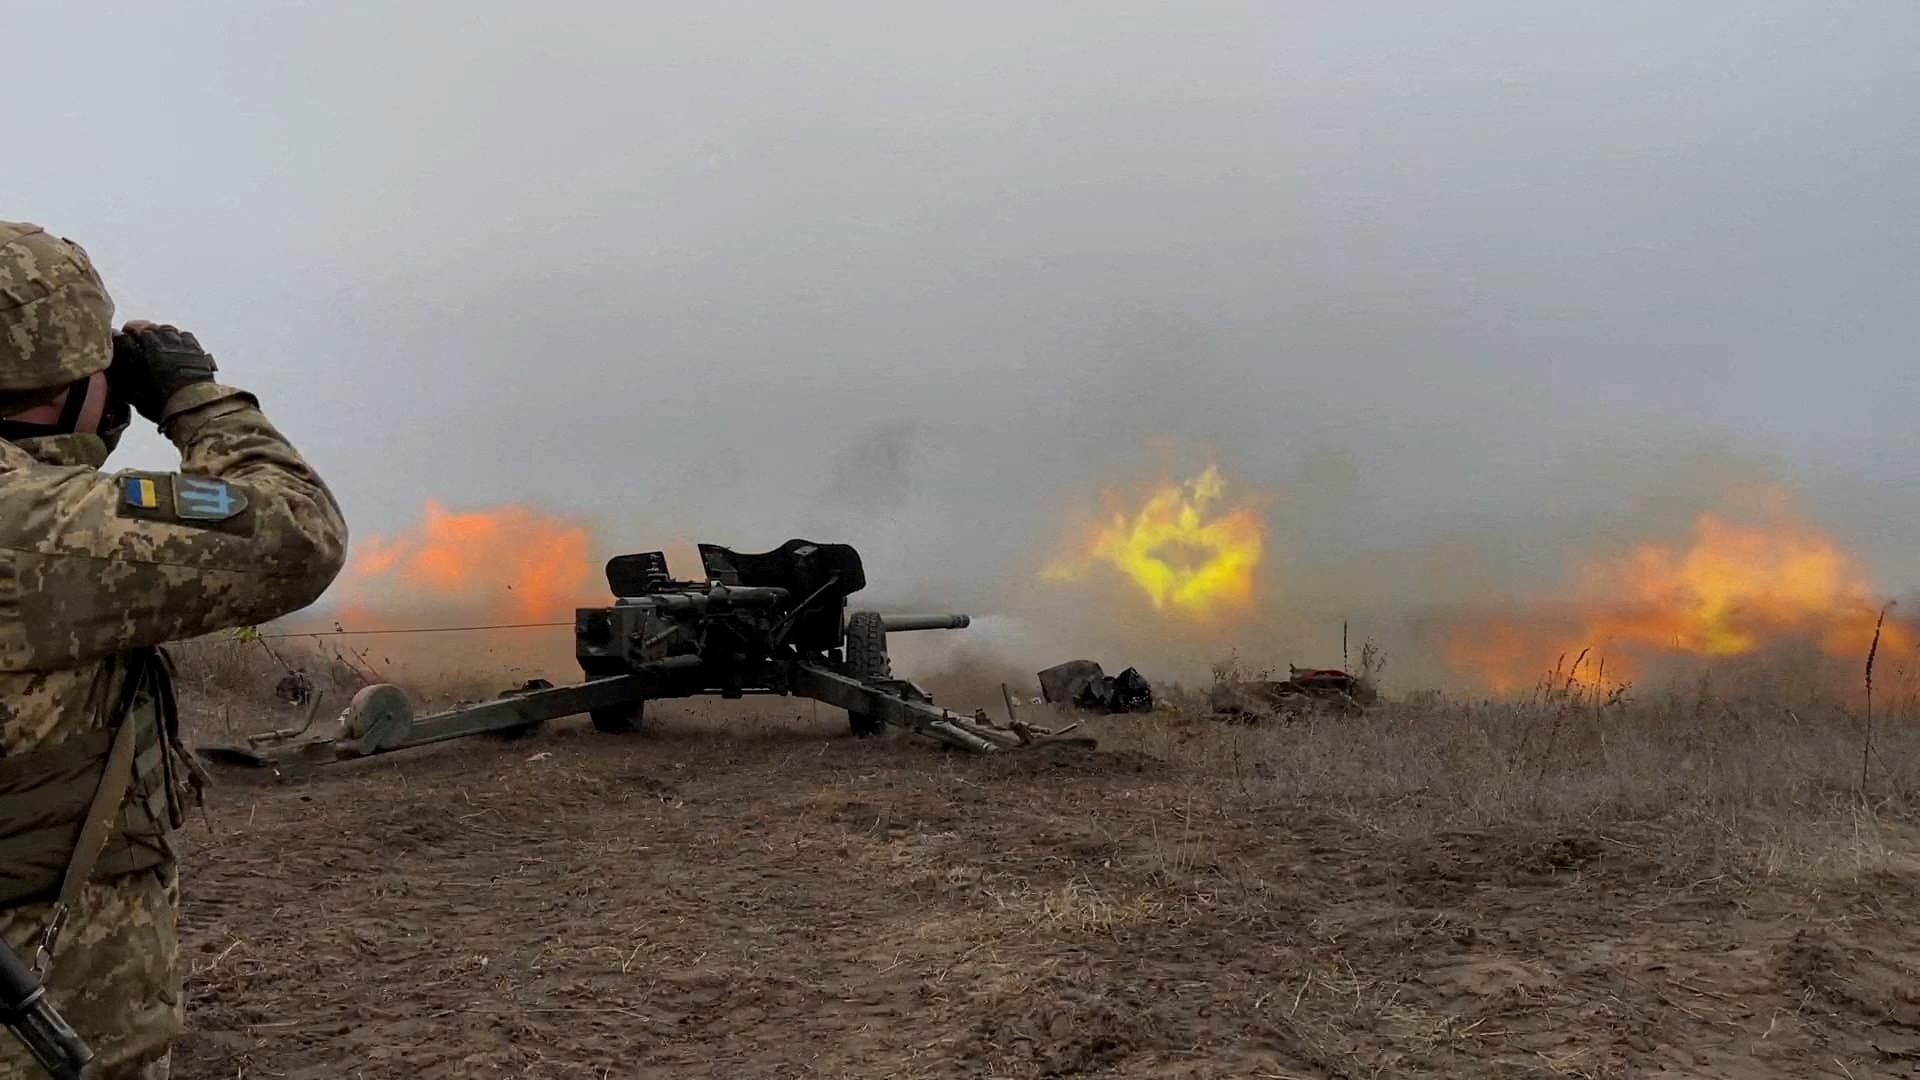 Ukrainian army holds artillery drills at a shooting range in eastern Ukraine